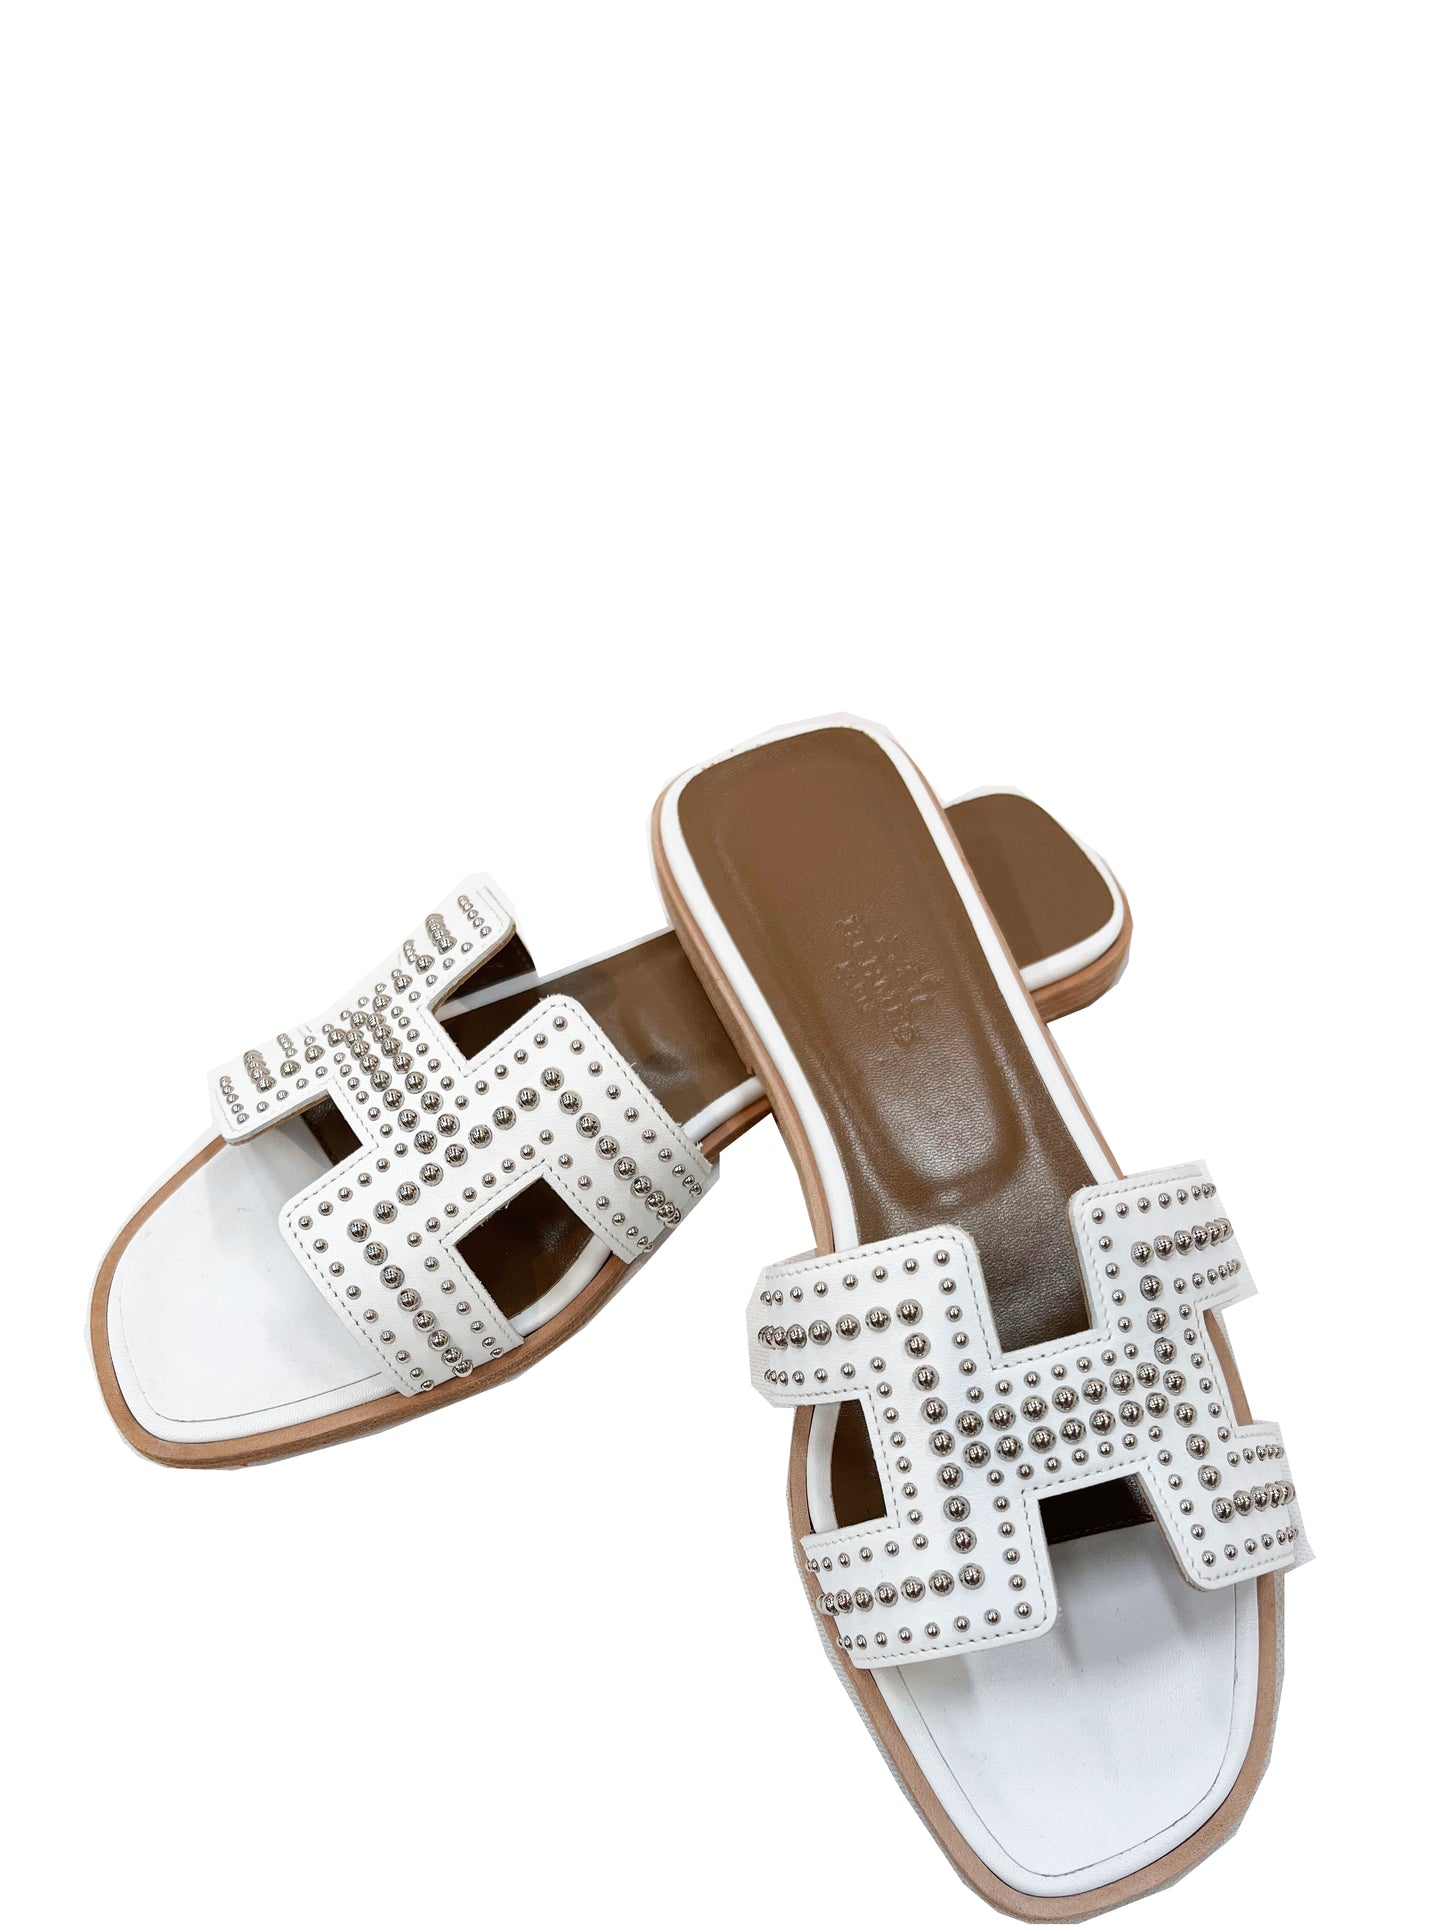 HERMES Leather Studded Tomette Oran Sandals White Size 37